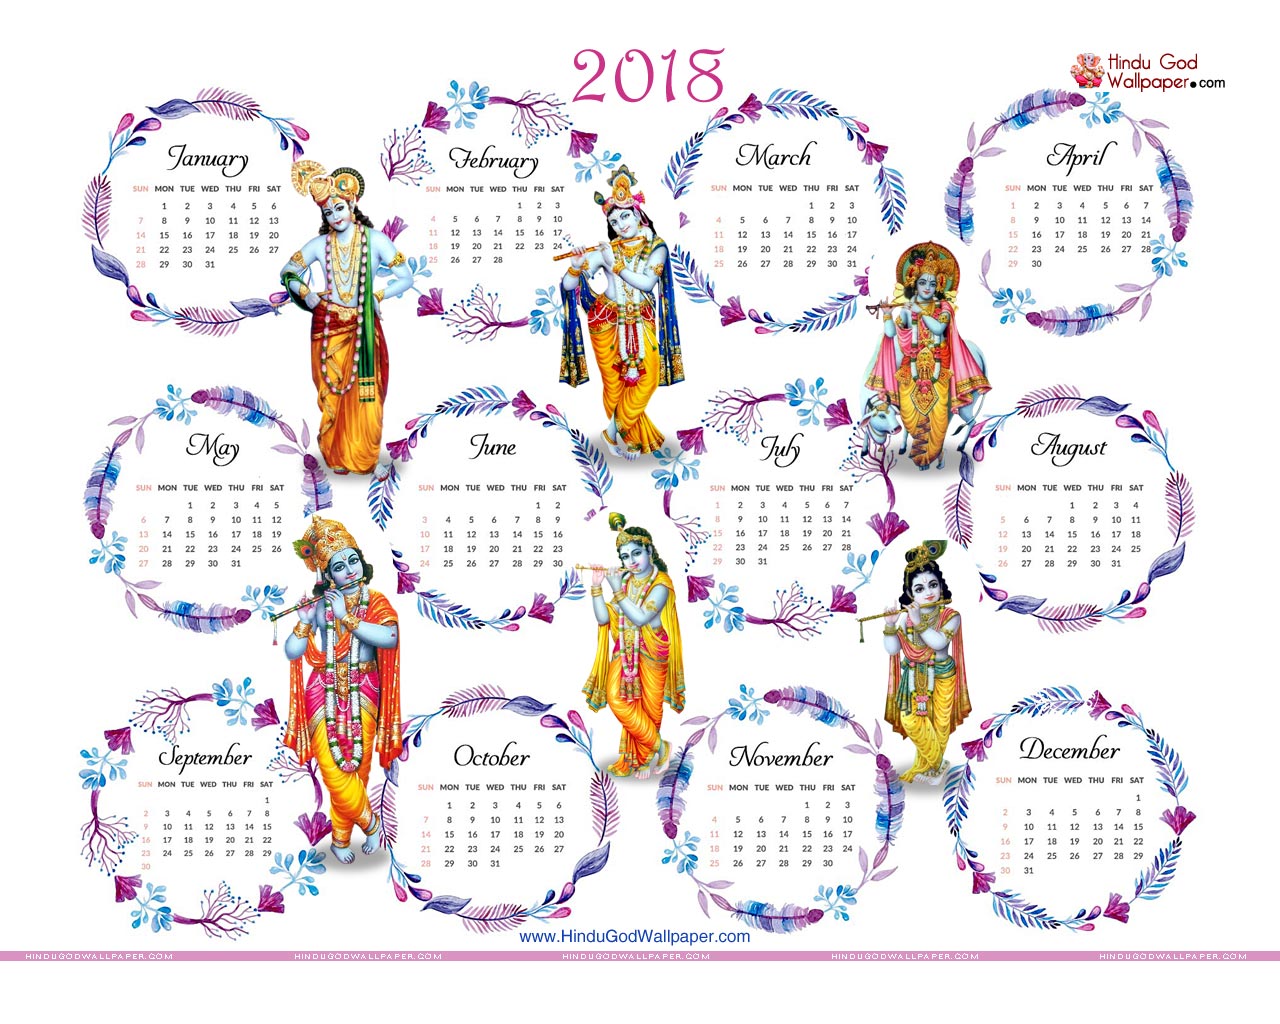 Free Desktop Calendar 2018 with Holidays Click and Download